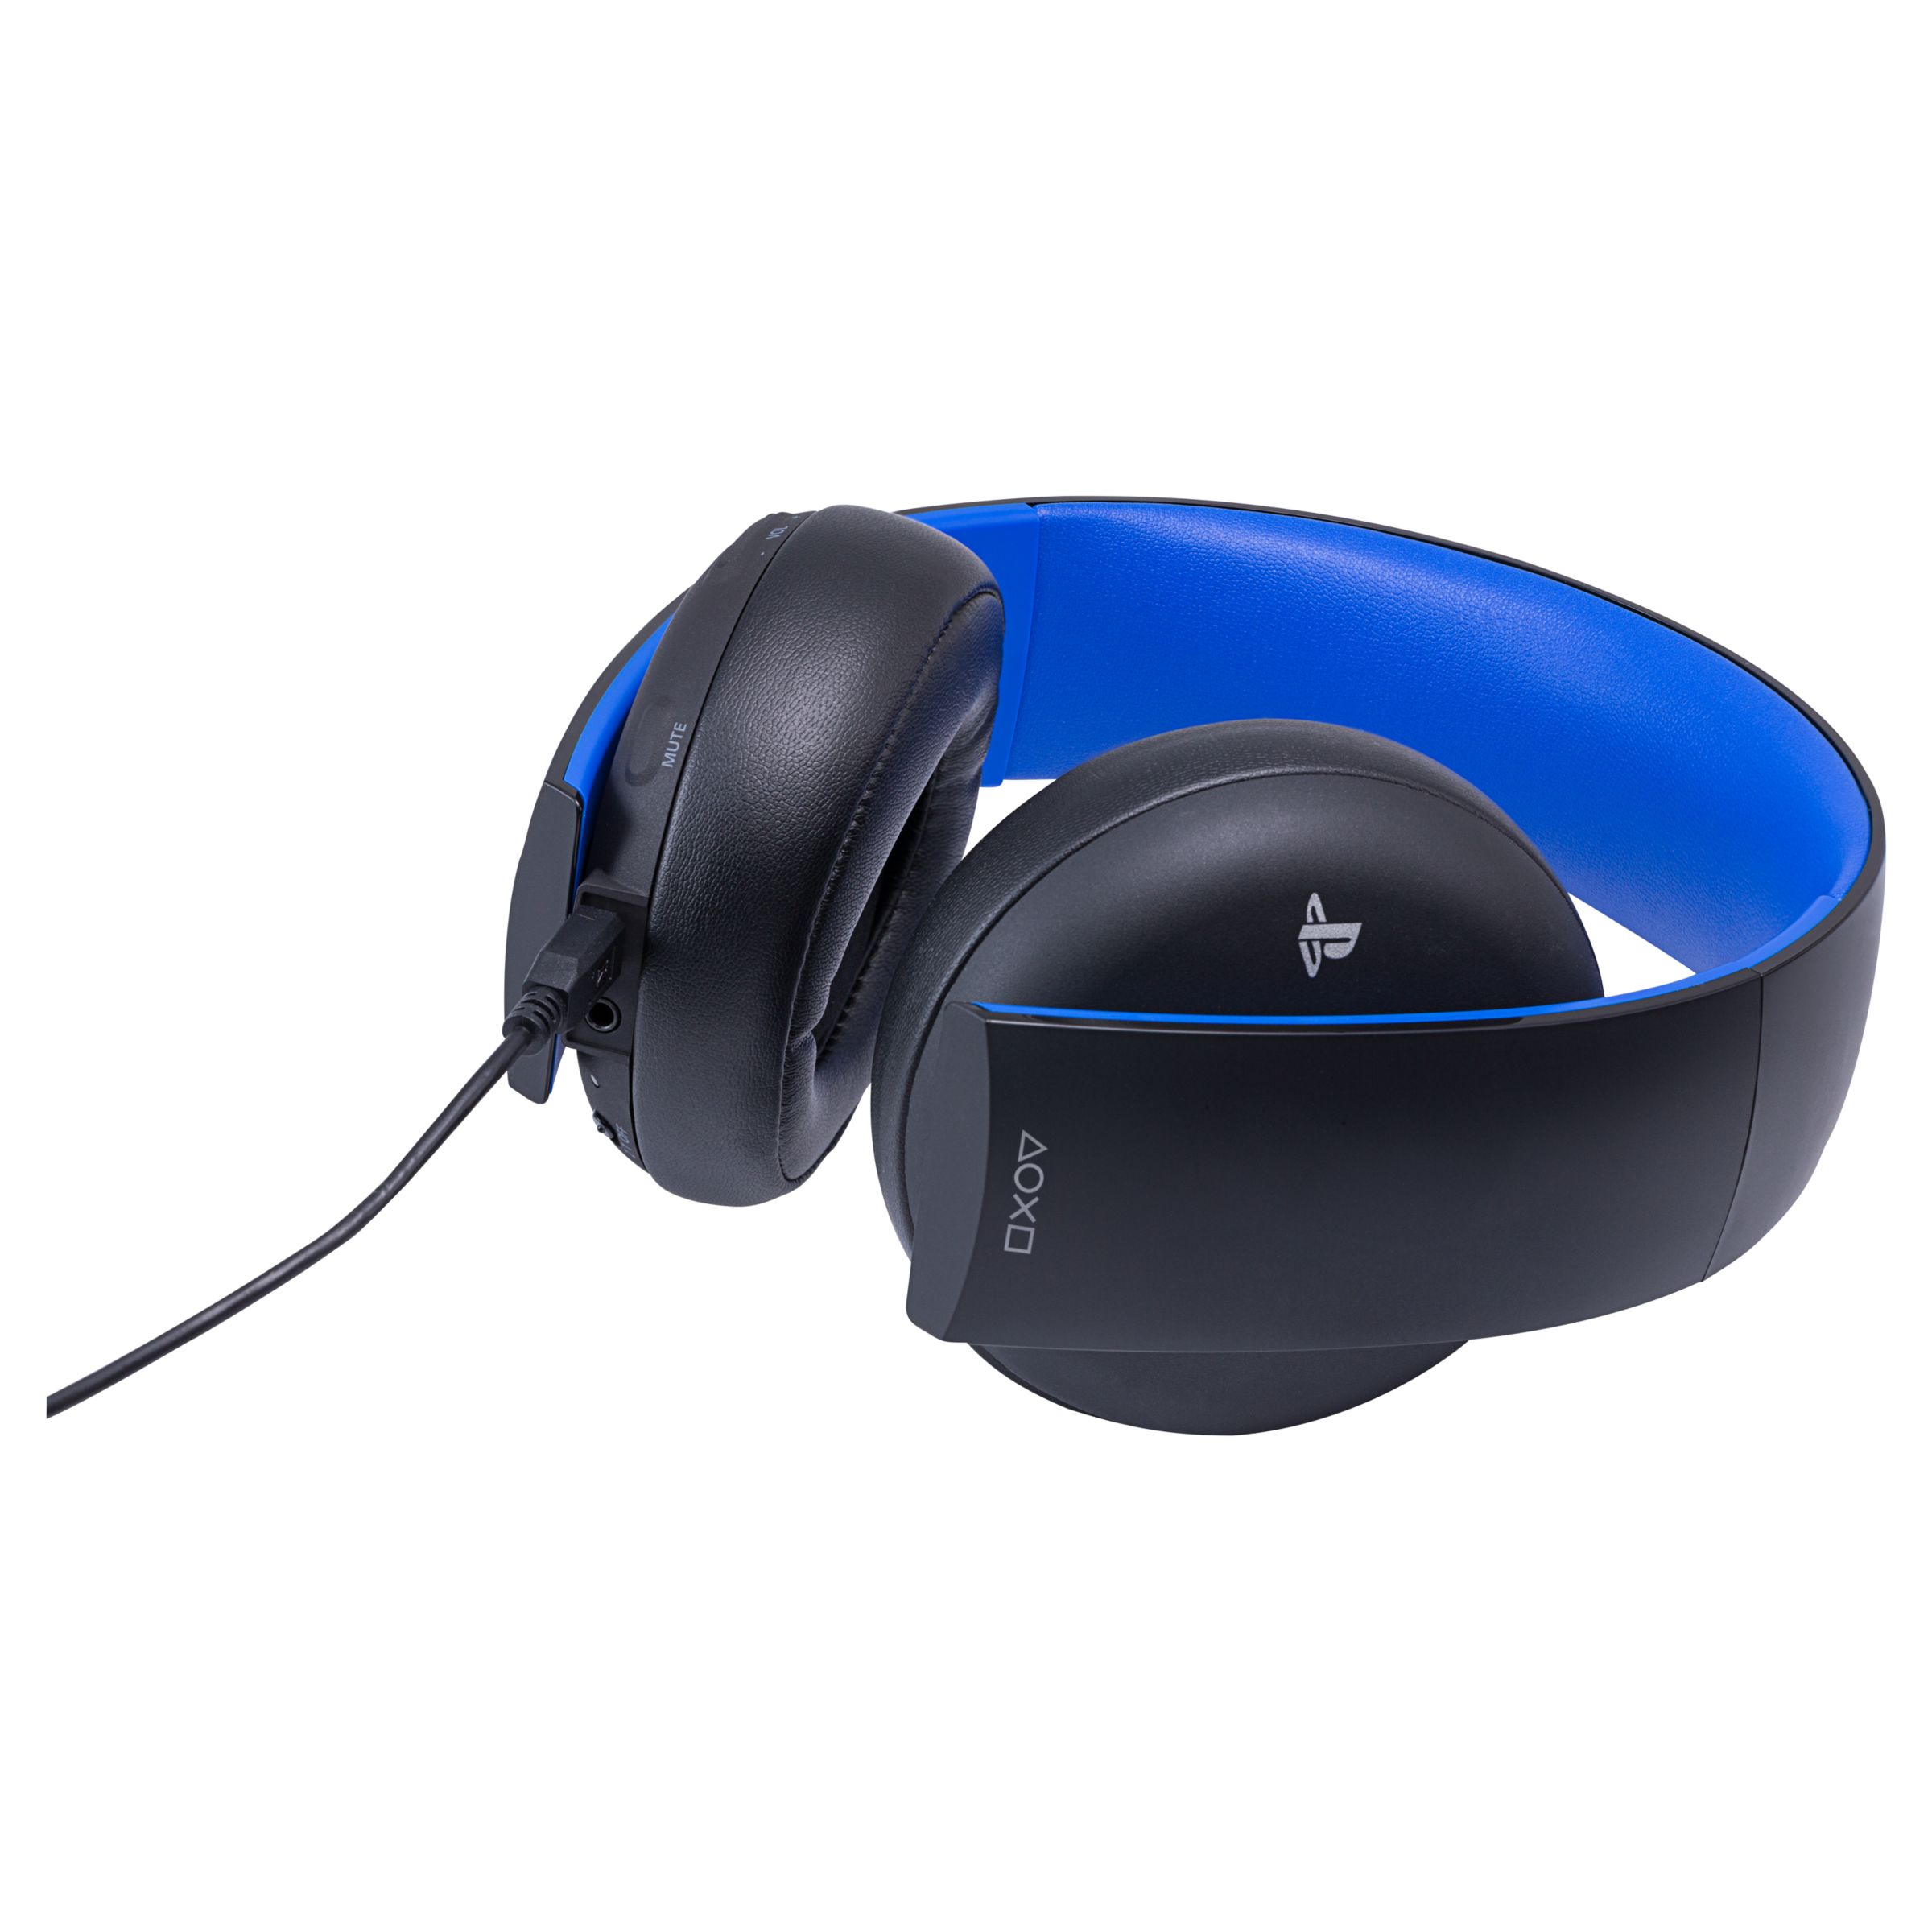 playstation 4 wireless stereo headset 2.0